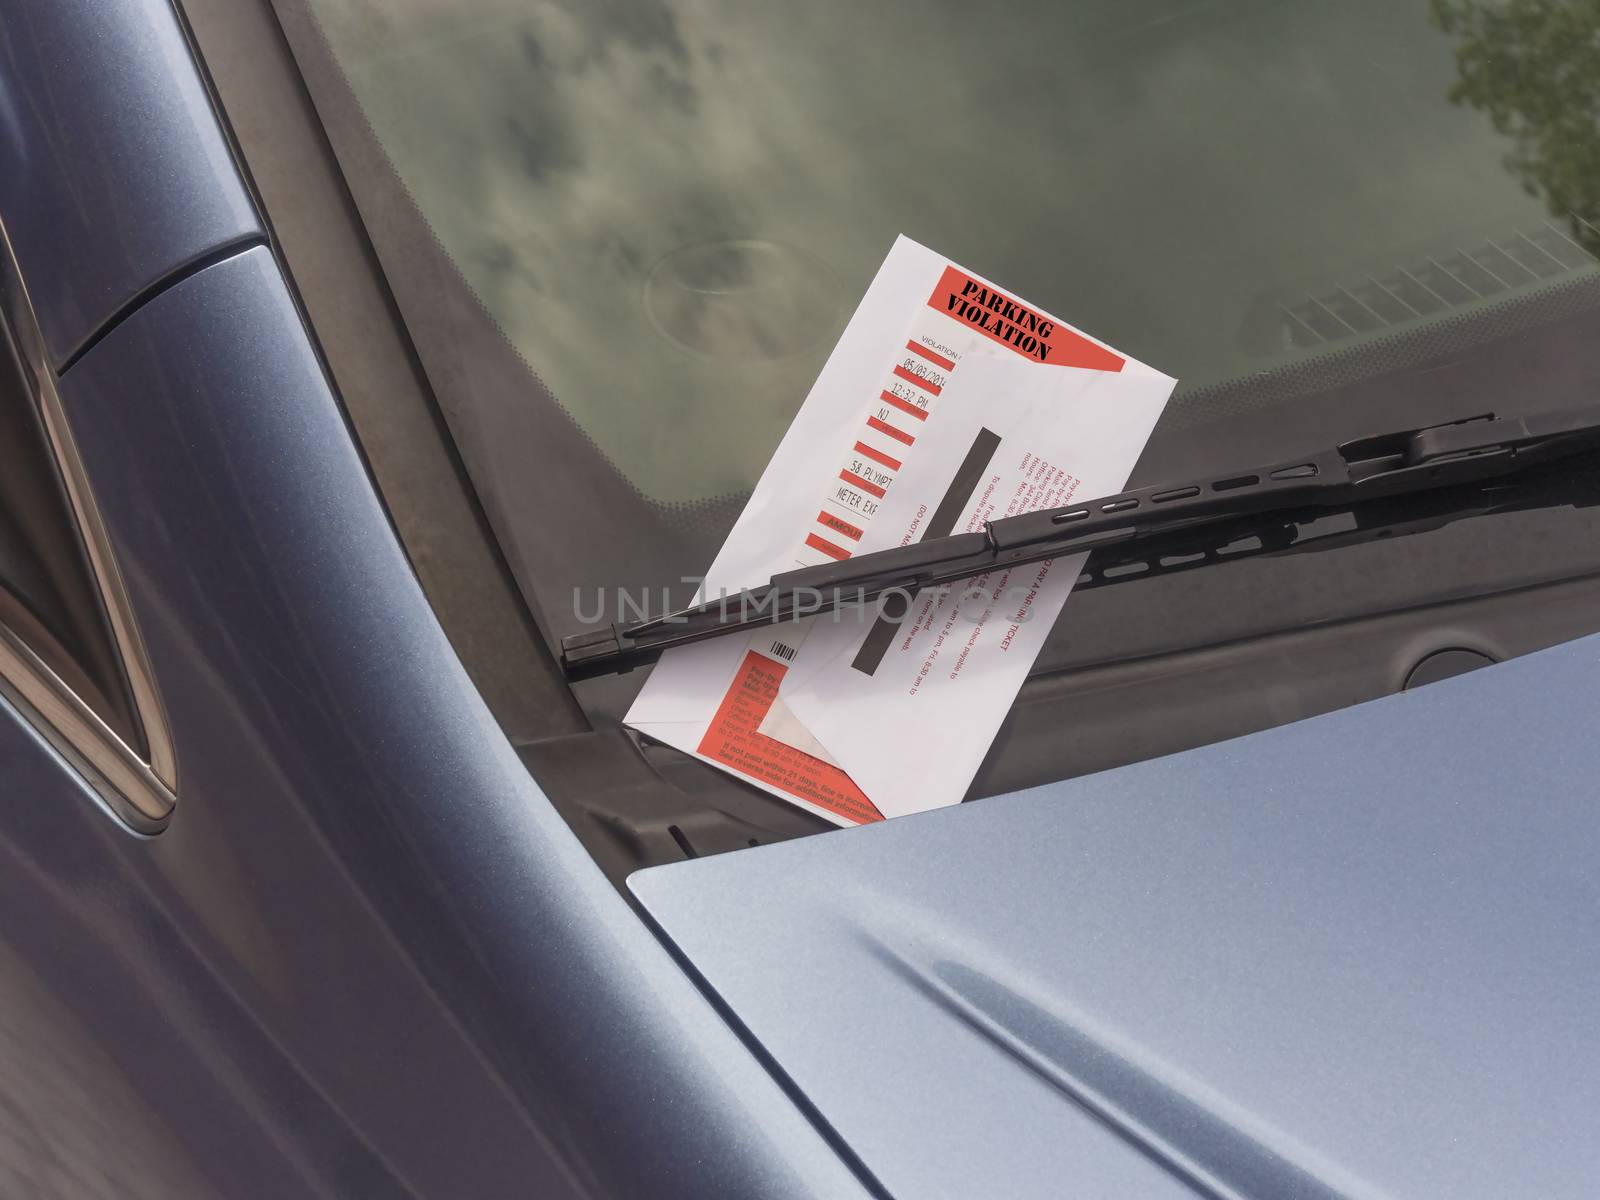 Parking ticket violation by f/2sumicron